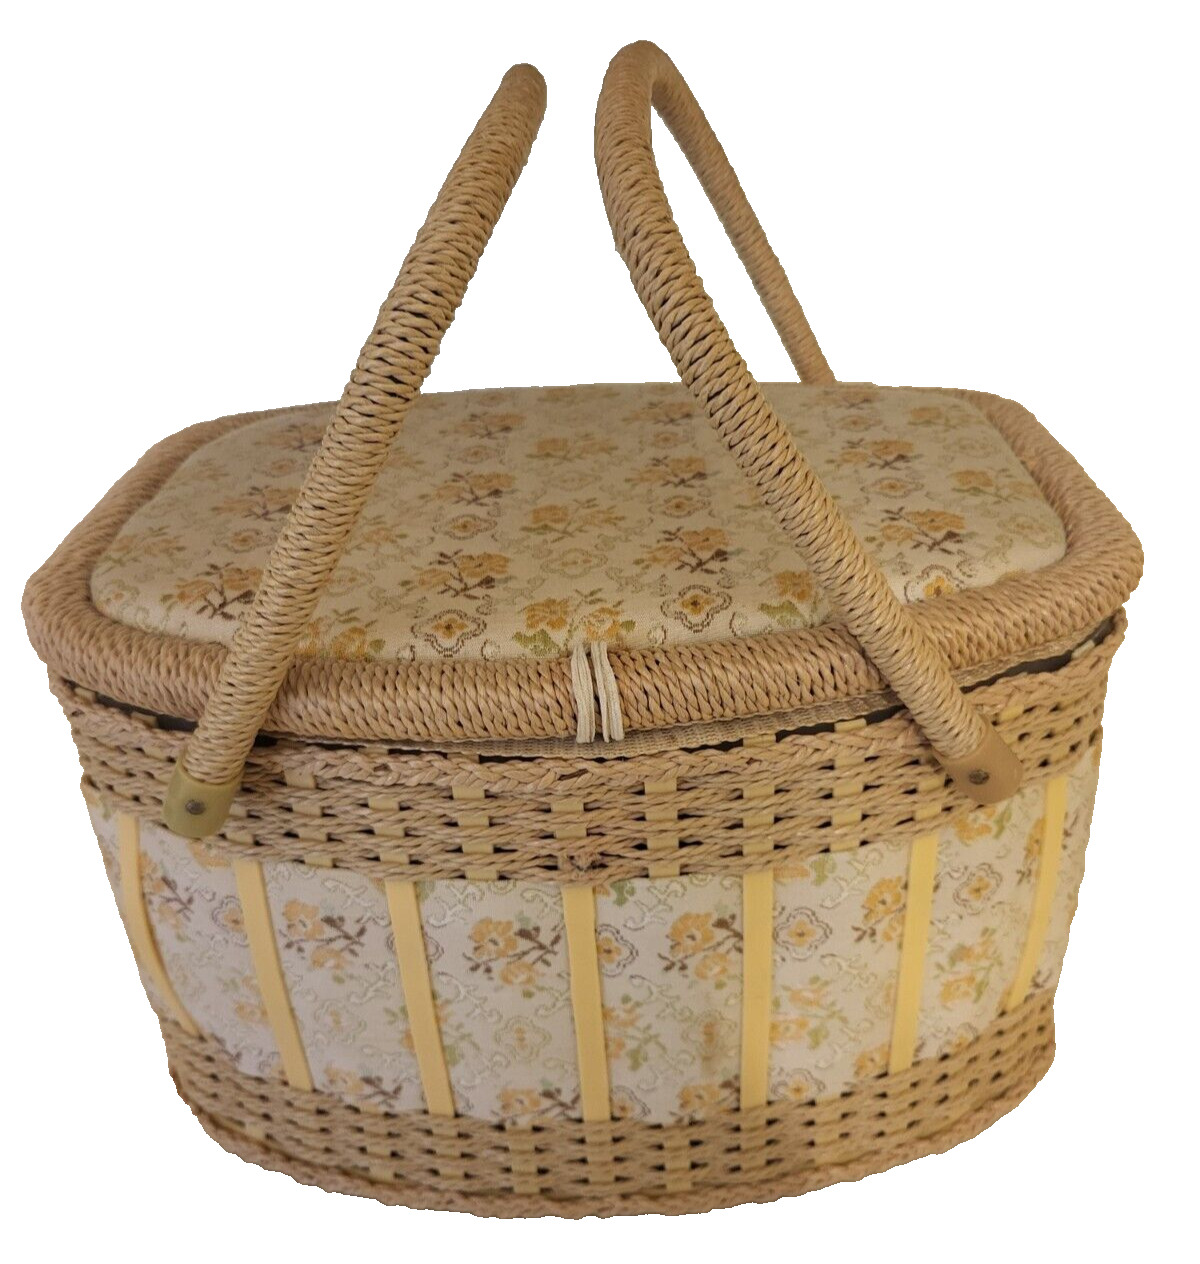 Sewing Basket Box Vintage floral Woven. Good size at 13x10x8 1/4 tall.